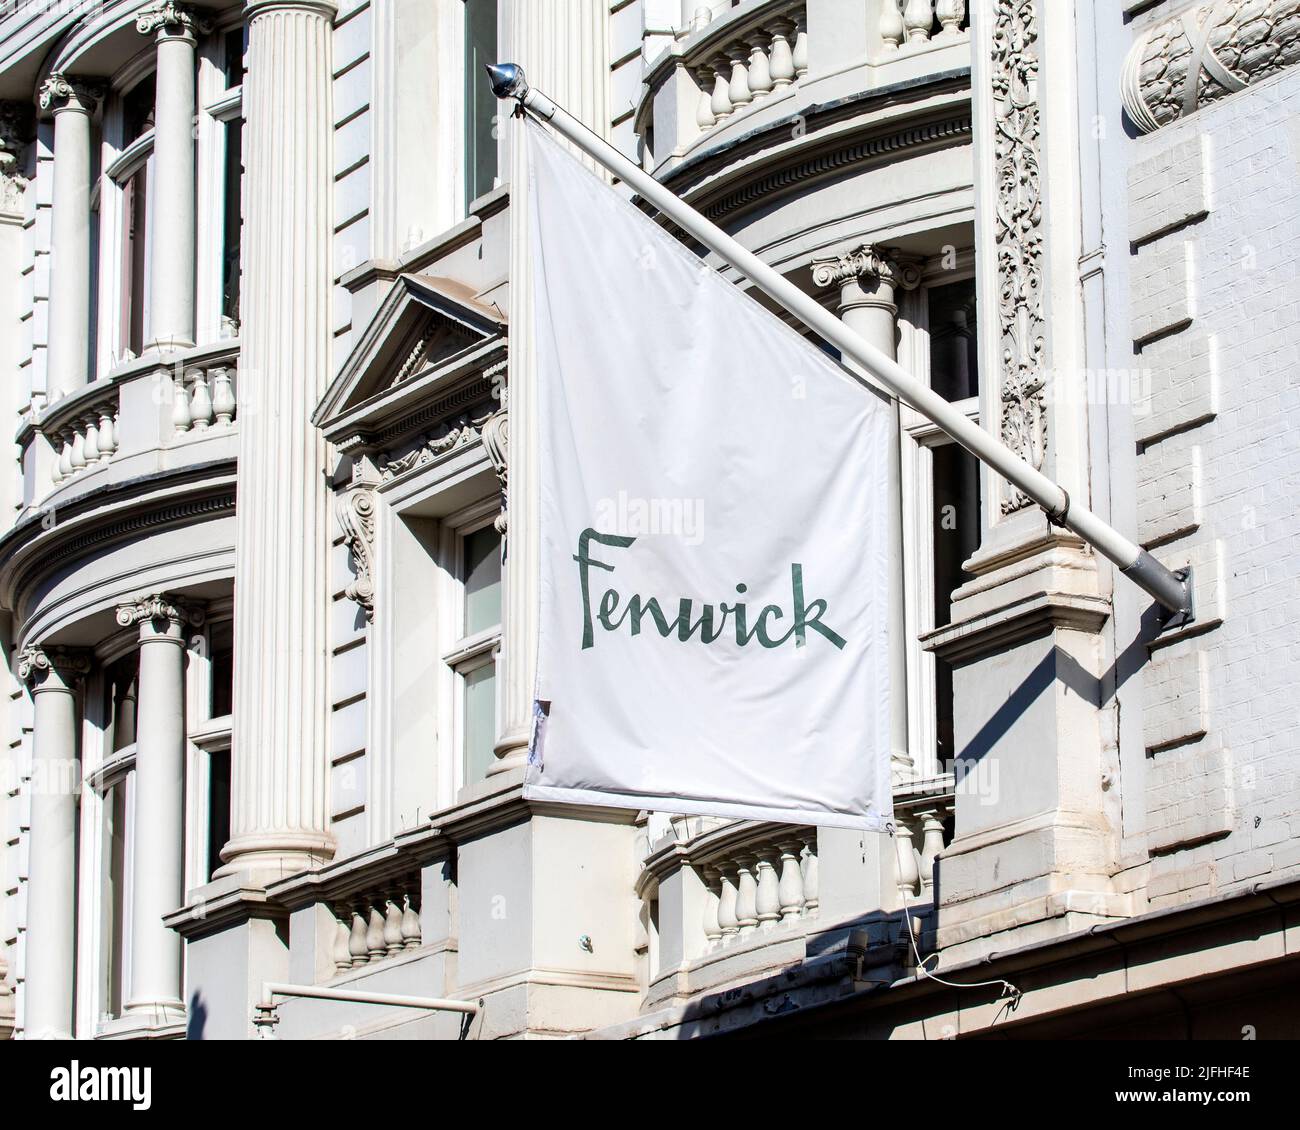 London, UK - March 8th 2022: Fenwick banner above the entrance to the Fenwick department store on New Bond Street in the Mayfair area of London, UK. Stock Photo